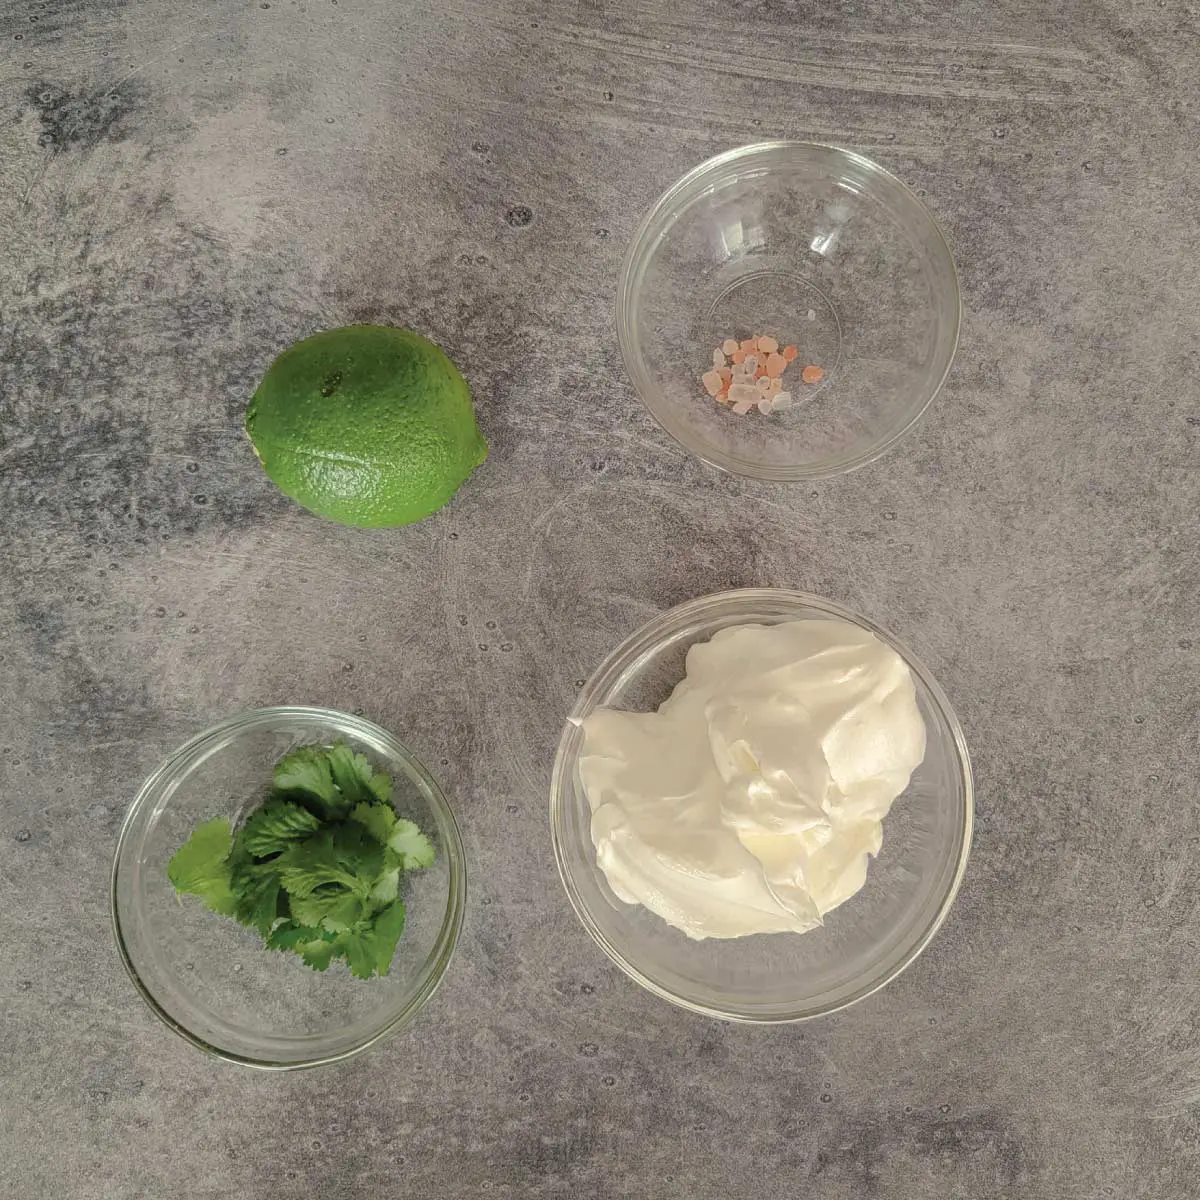 Ingredients prepped for the sour cream mixture - cilantro, sour cream, sea salt and lime.